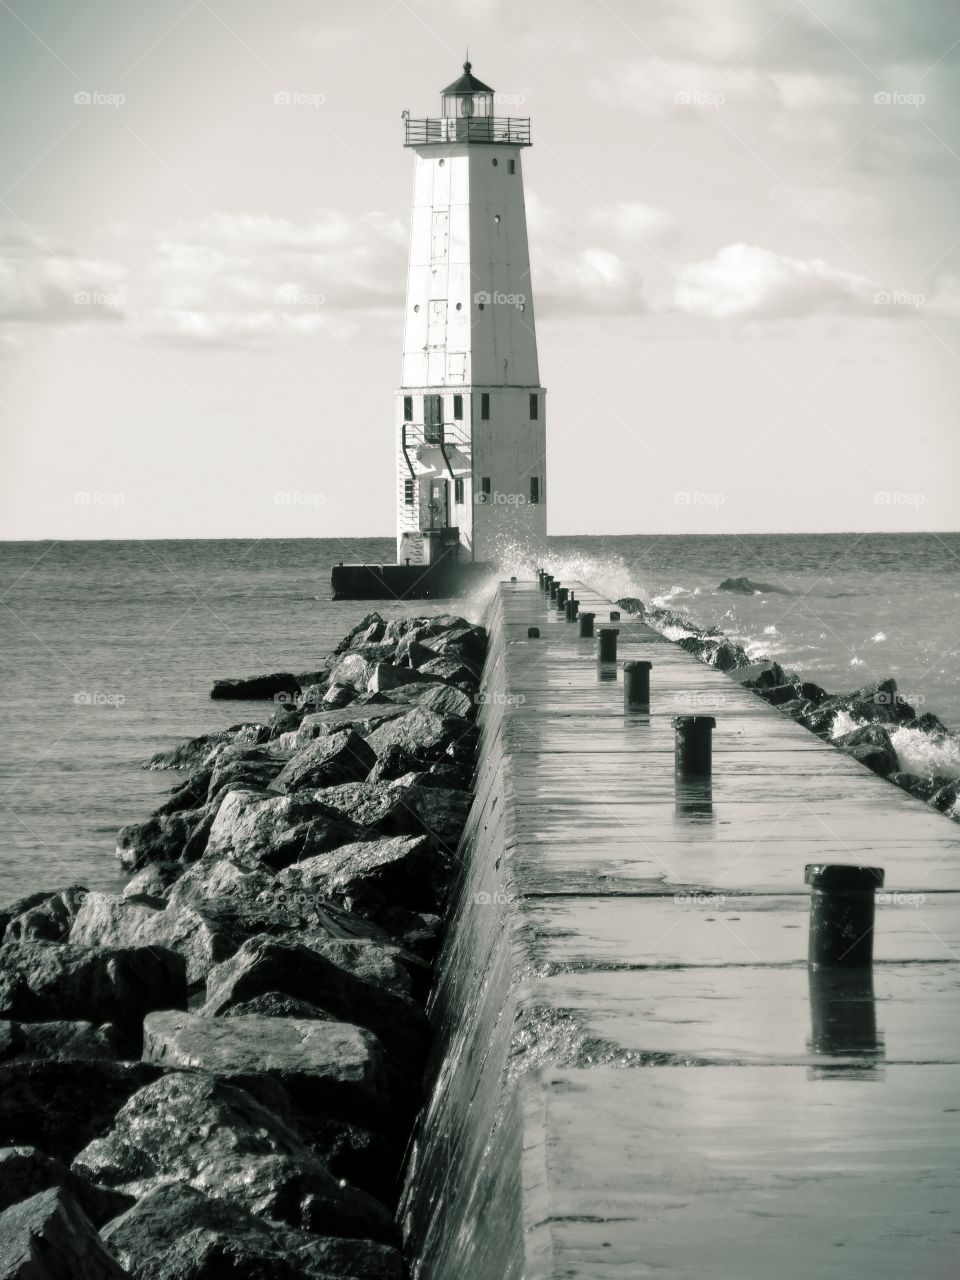 Lighthouse at the end of the pier in sea